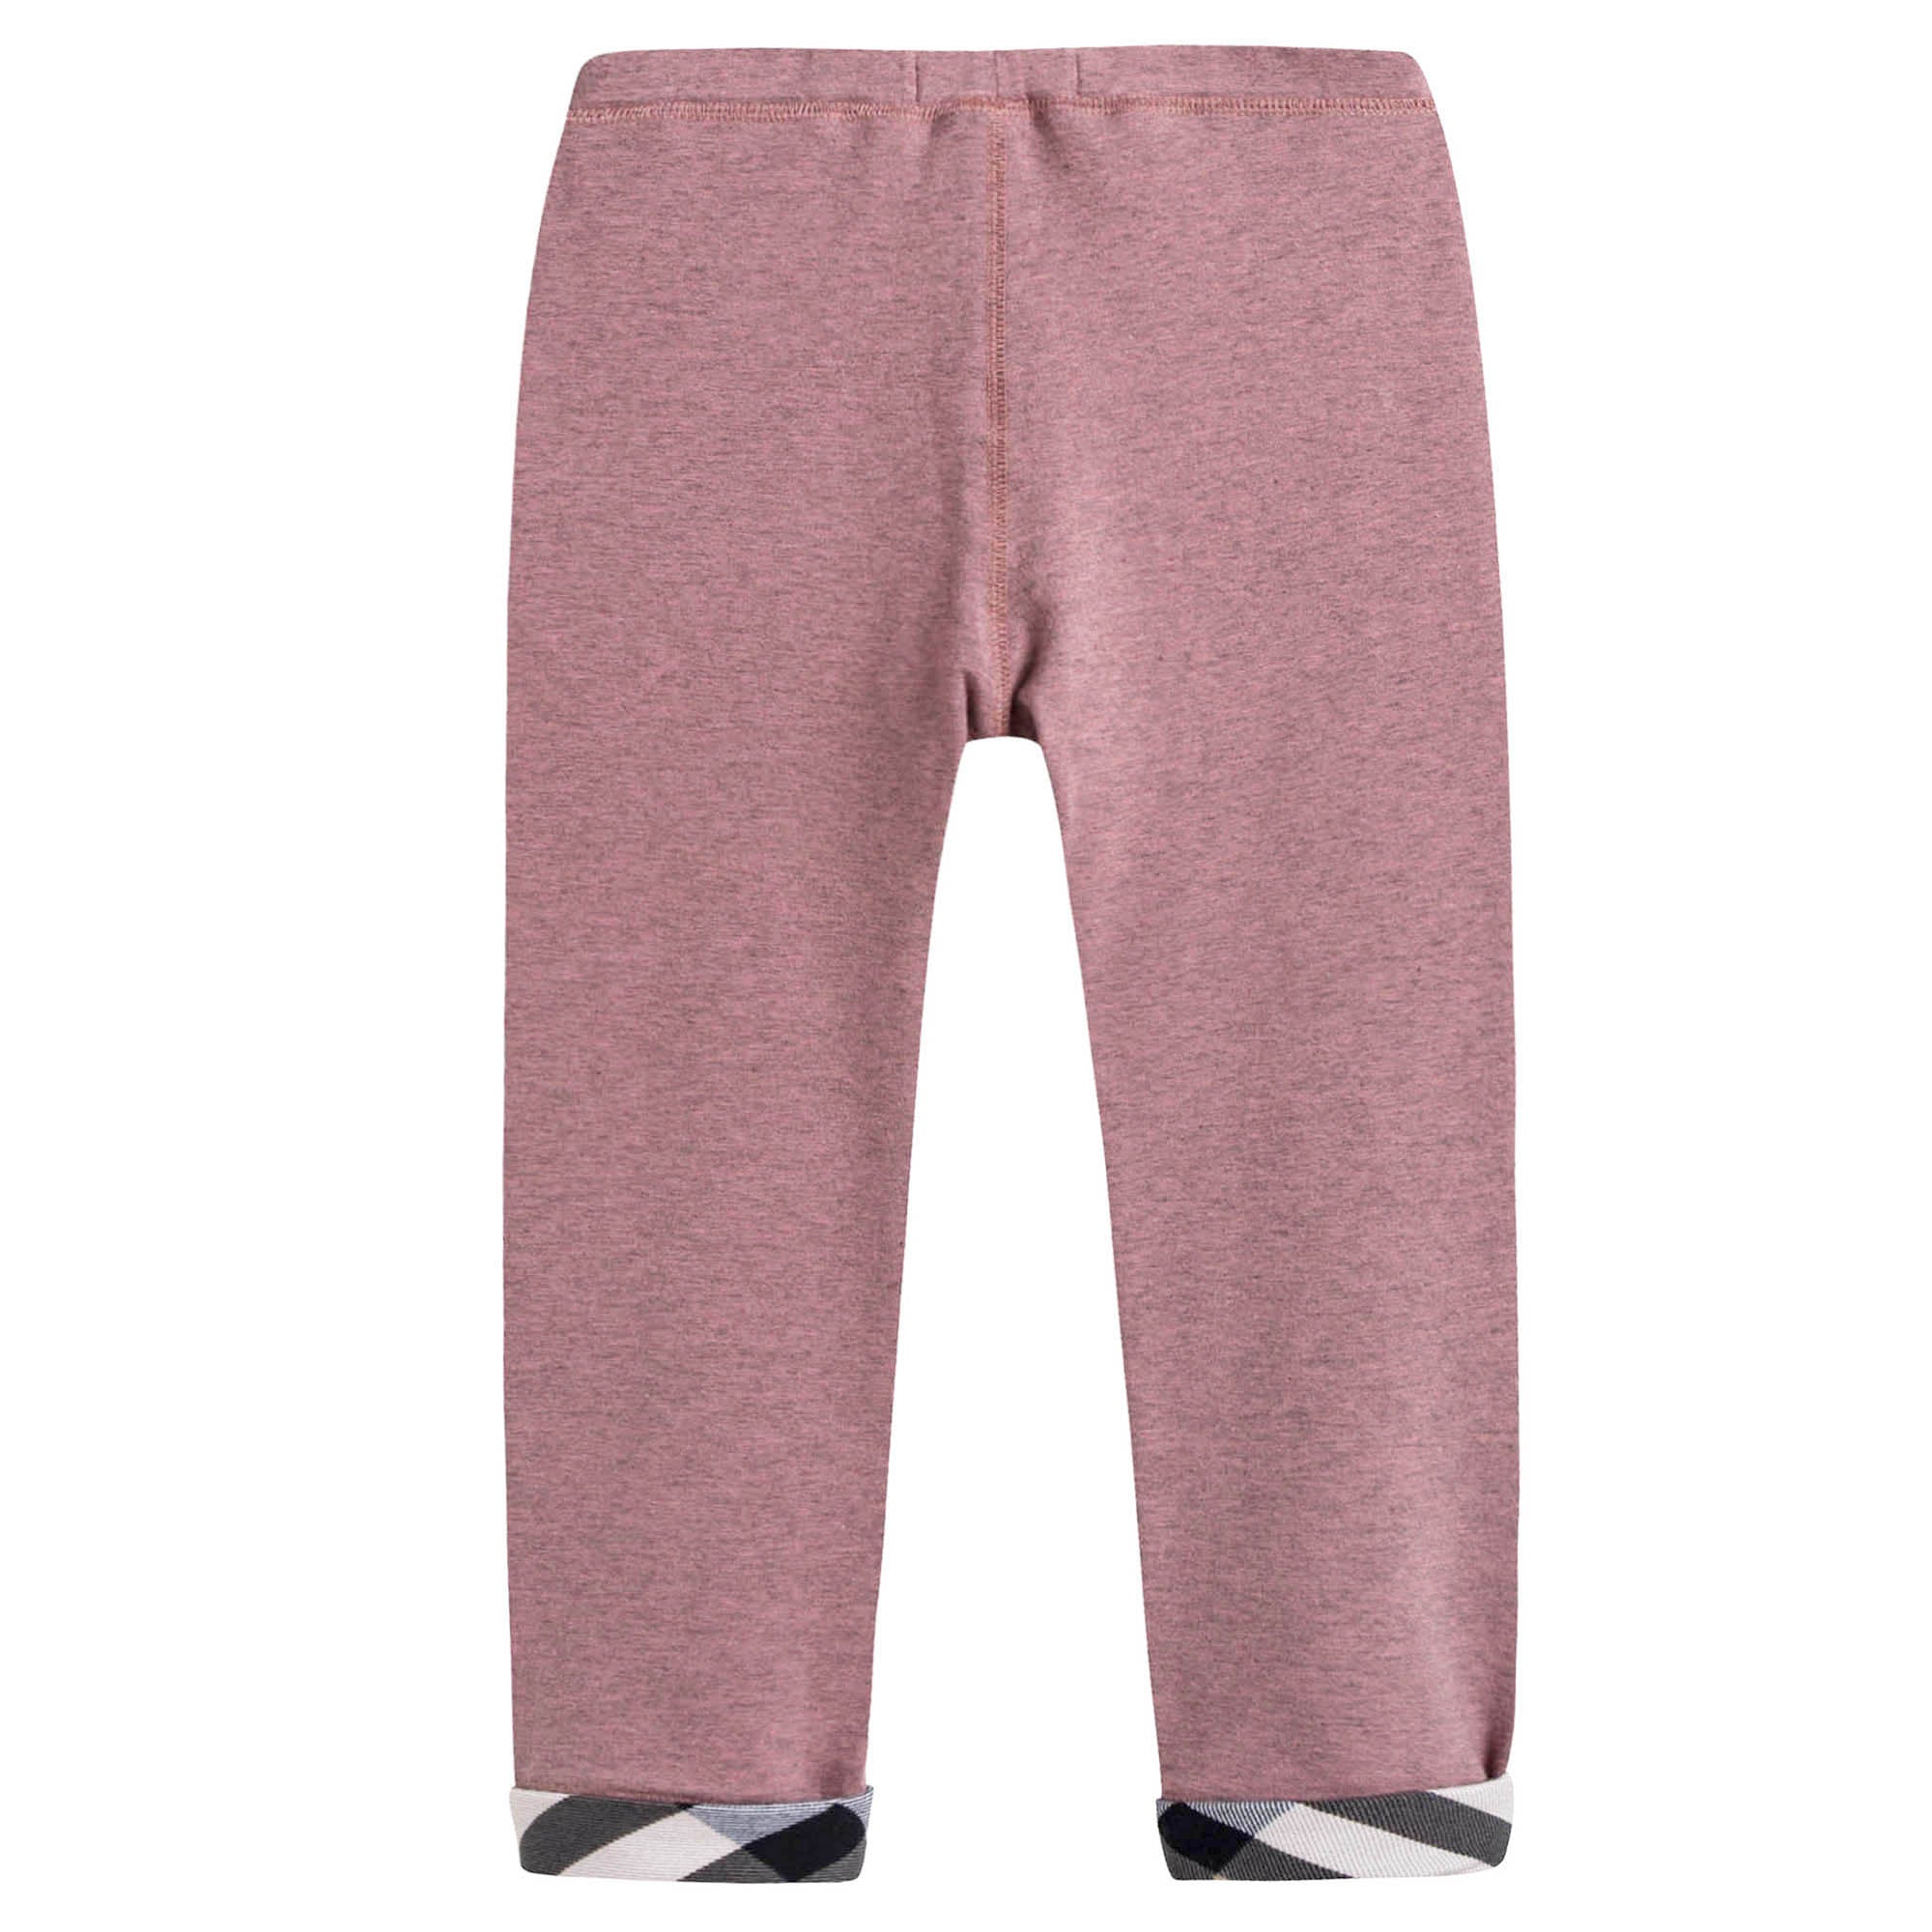 Girls Pink Cotton Leggings With Check Cuffs